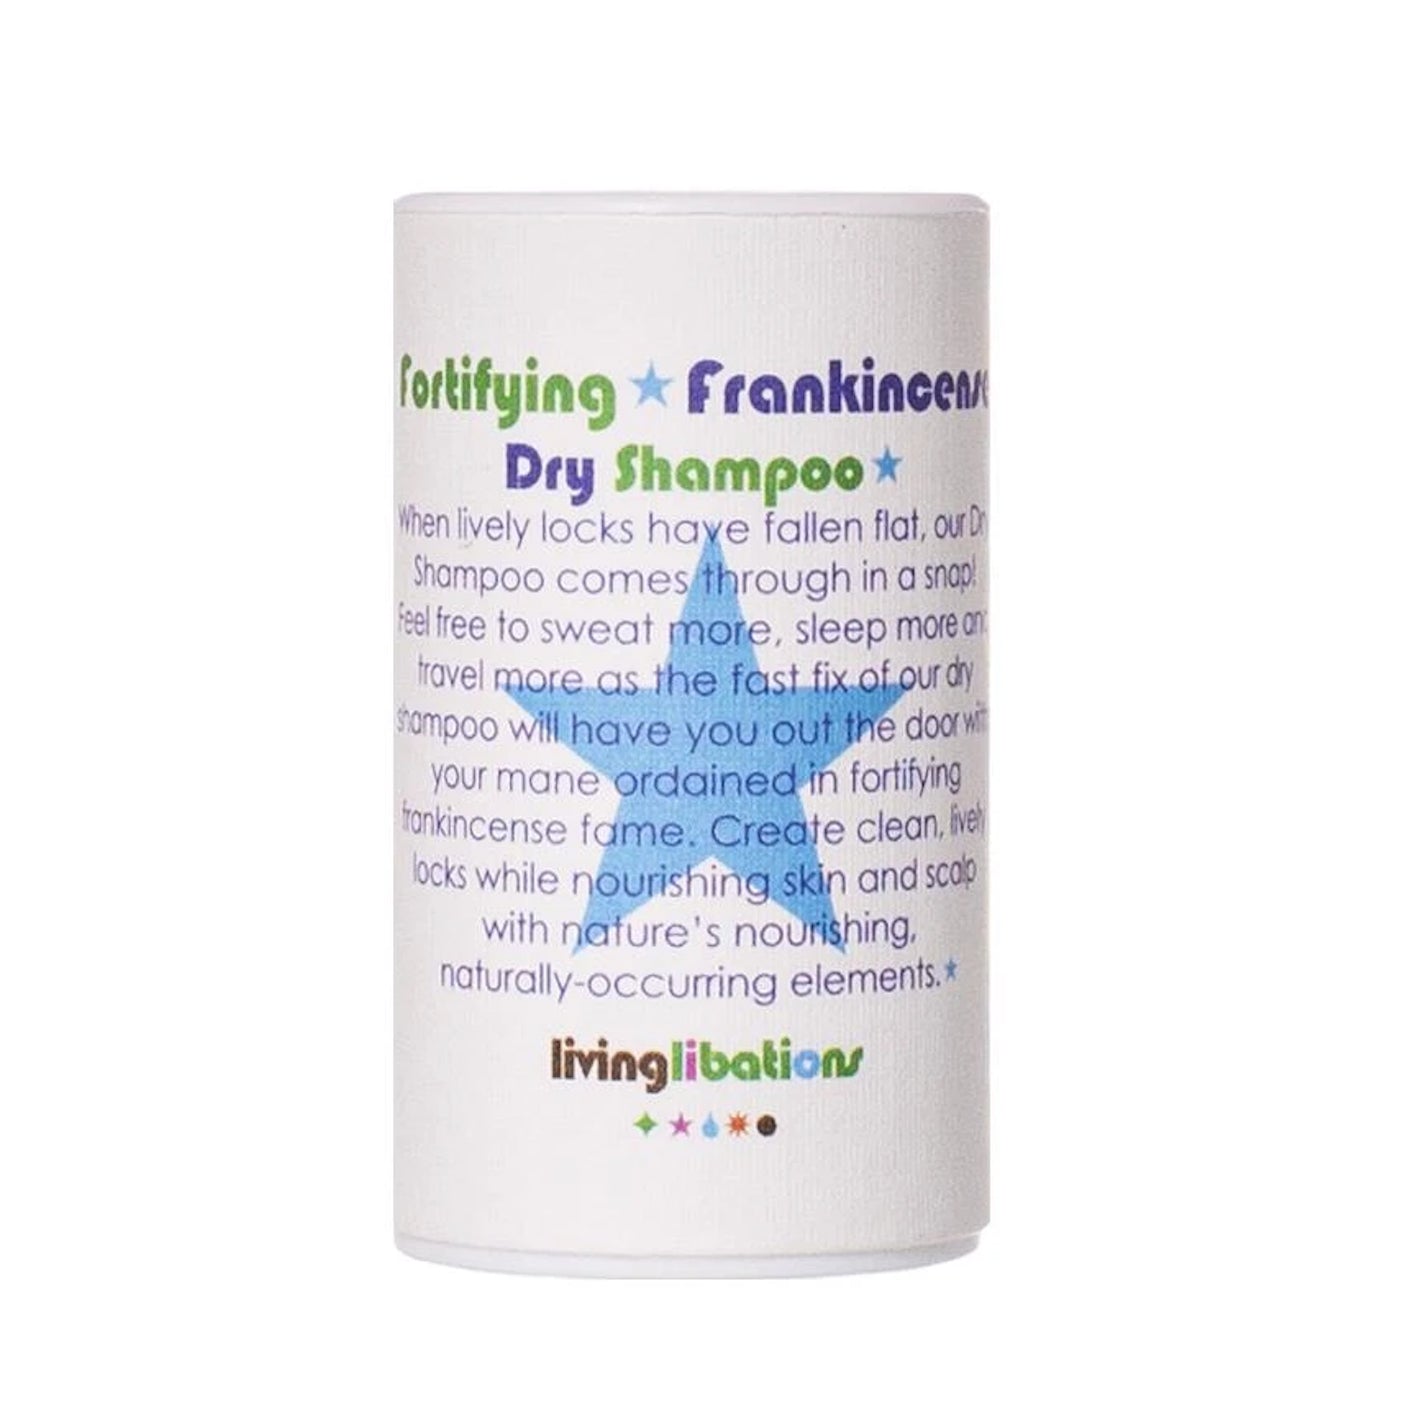 dry shampoo - fortifying frankincense 30ml